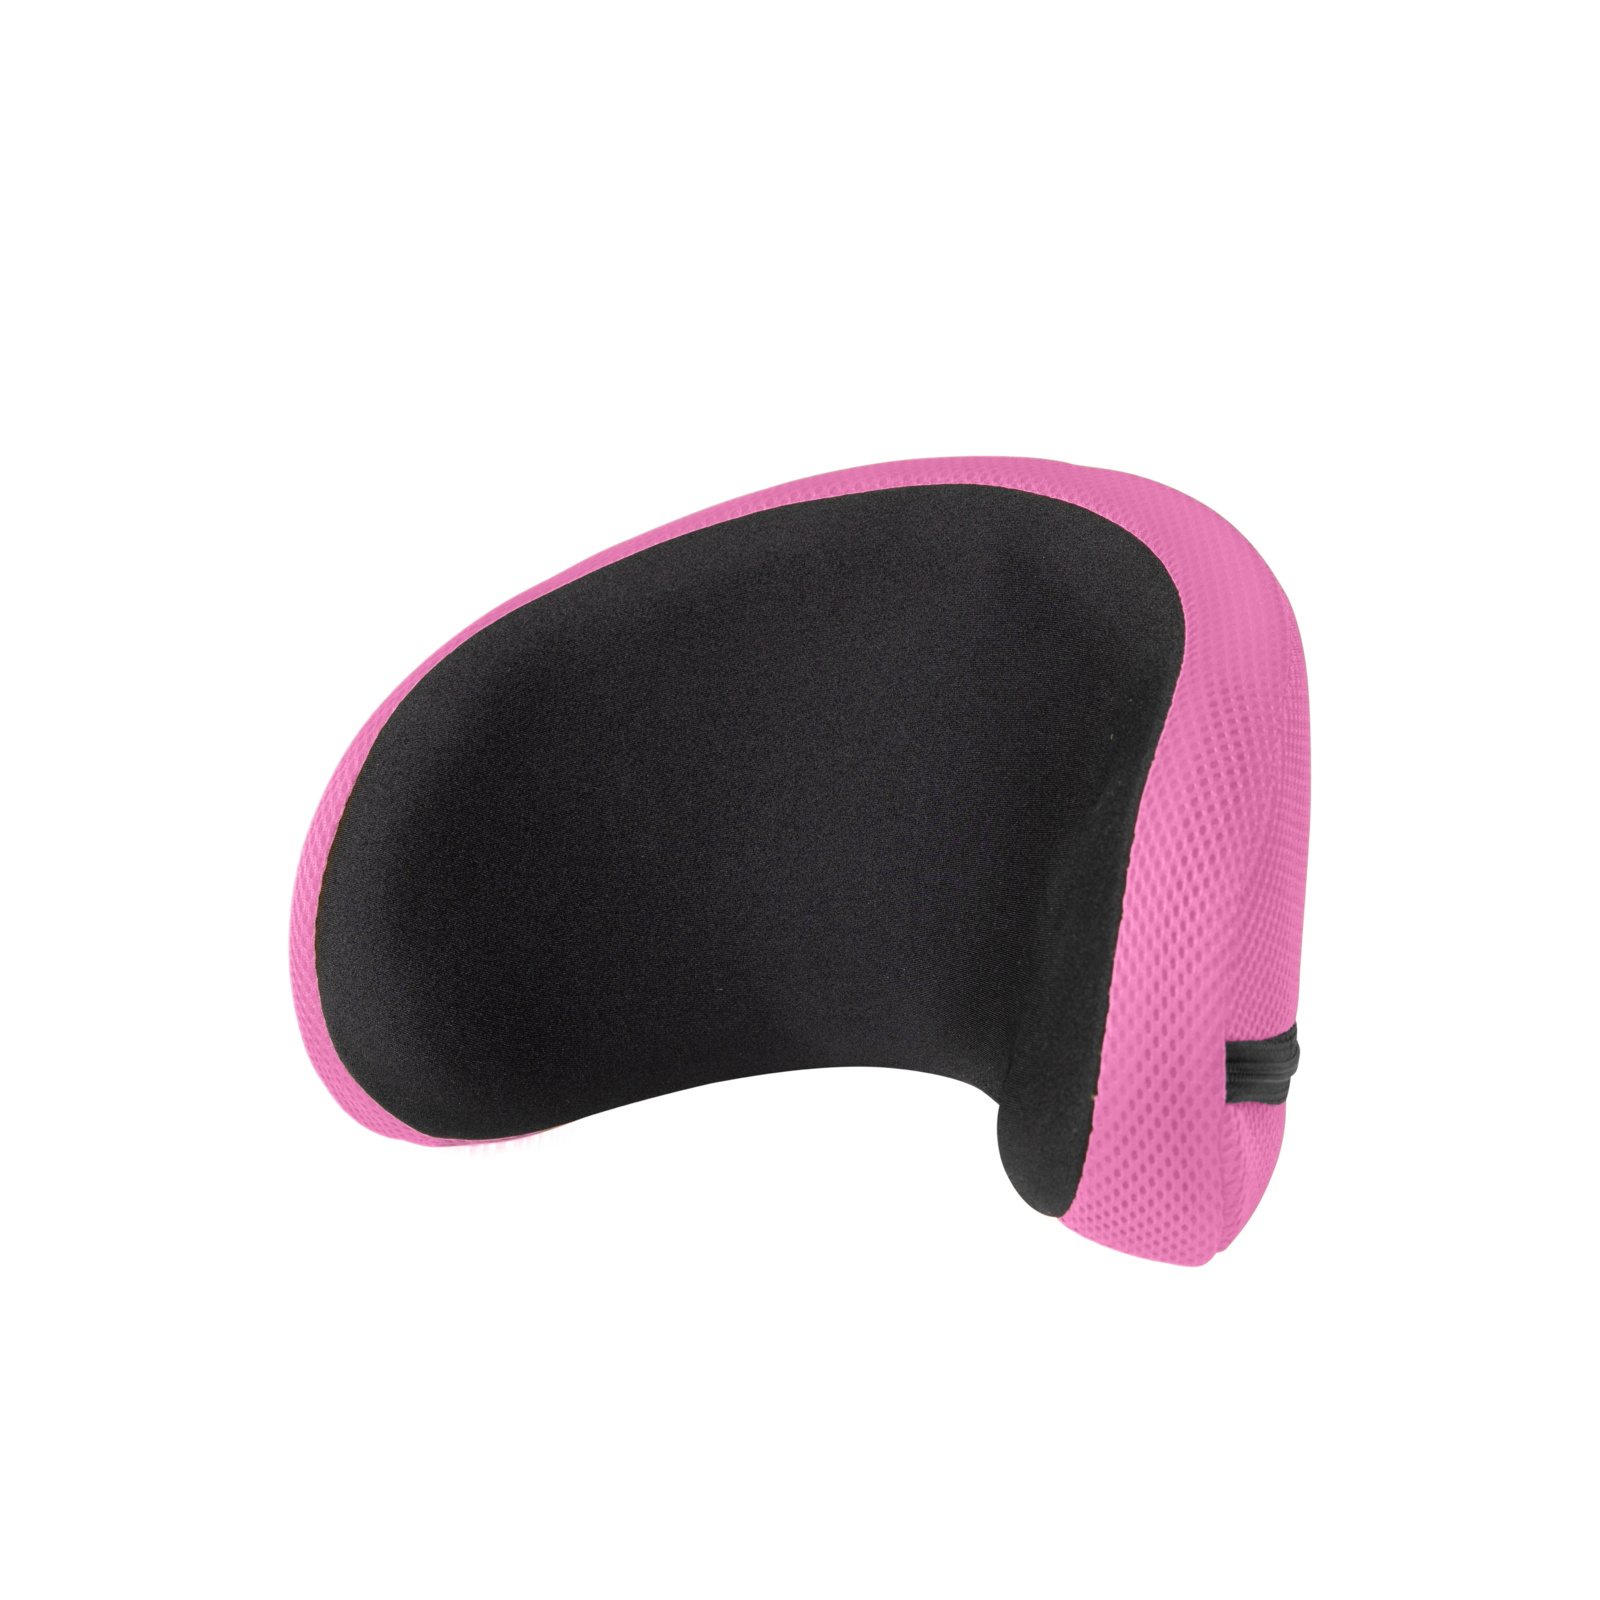 Head Support Pads